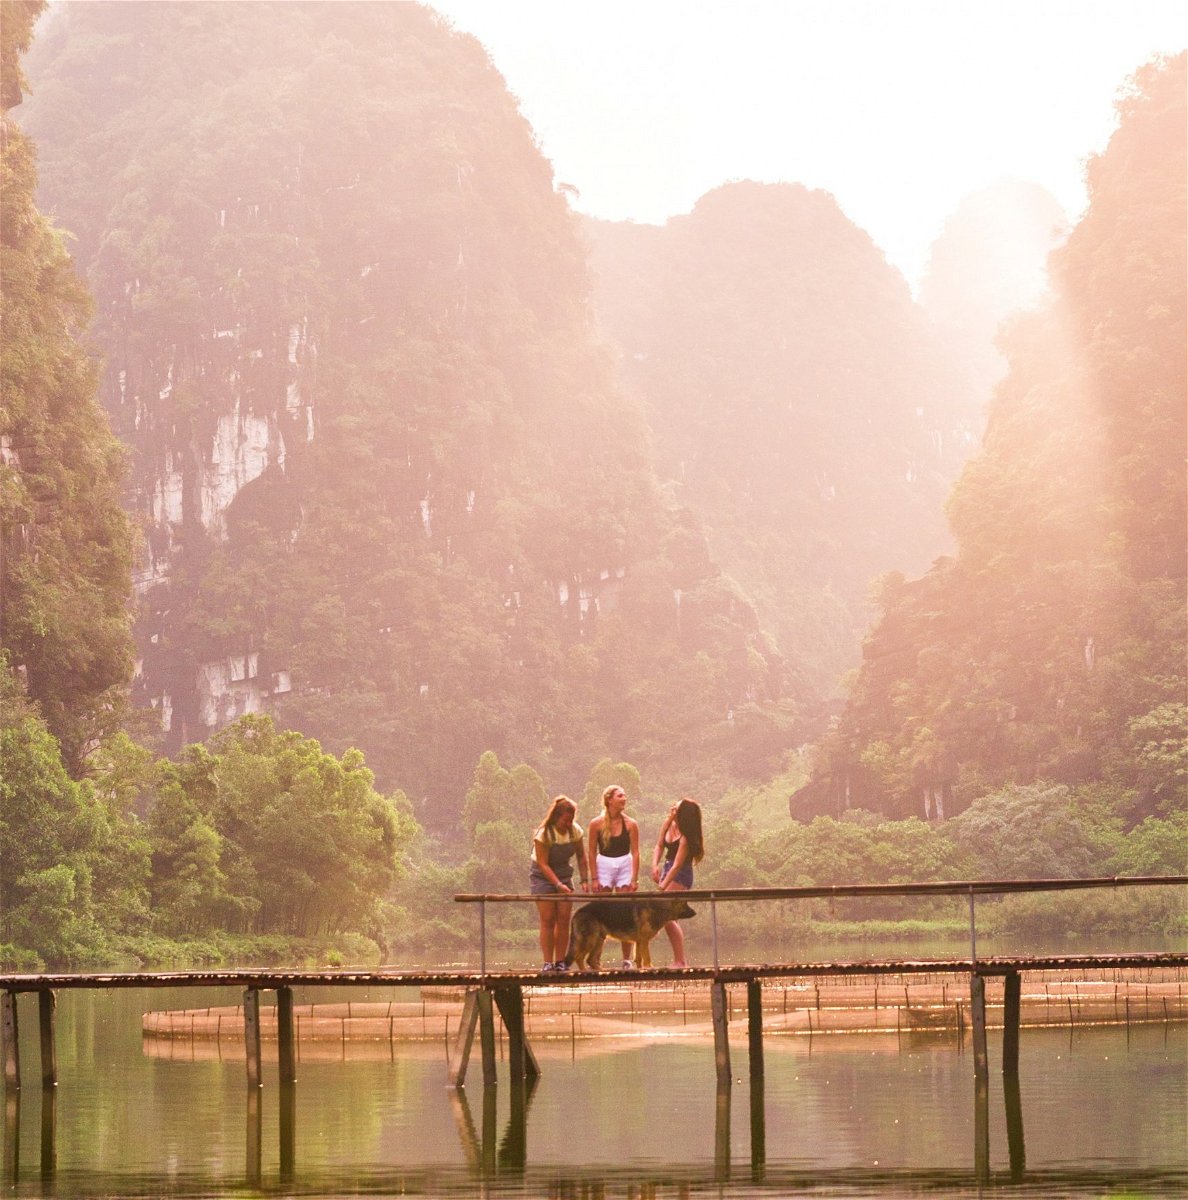 Relax in rural Ninh Binh in Vietnam with your group!